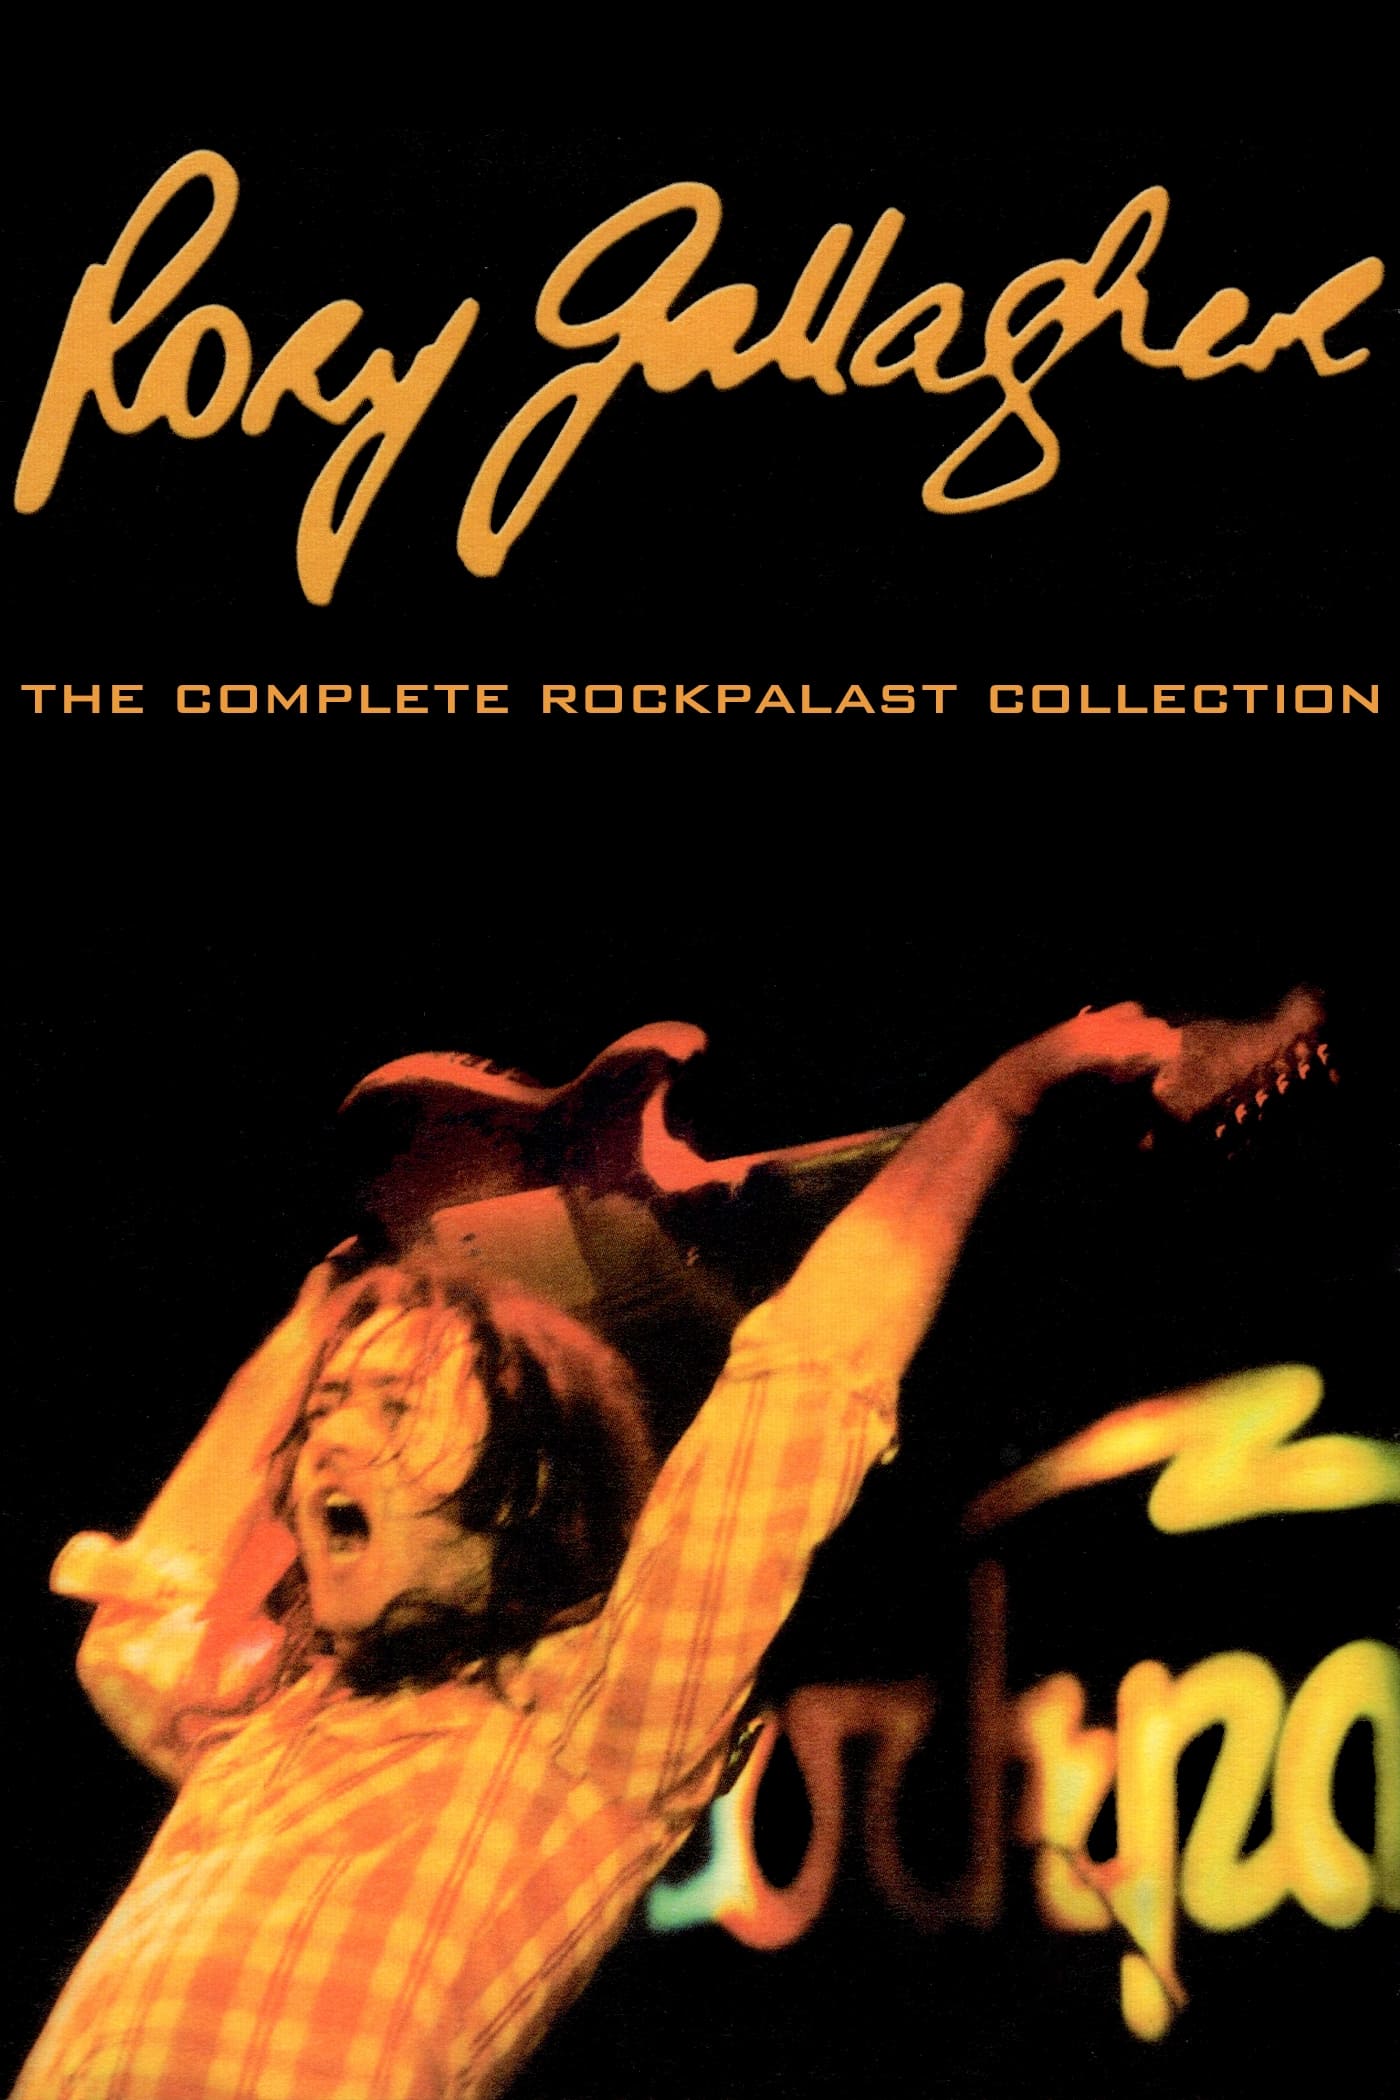 Rory Gallagher: Shadow Play - The Rockpalast Collection